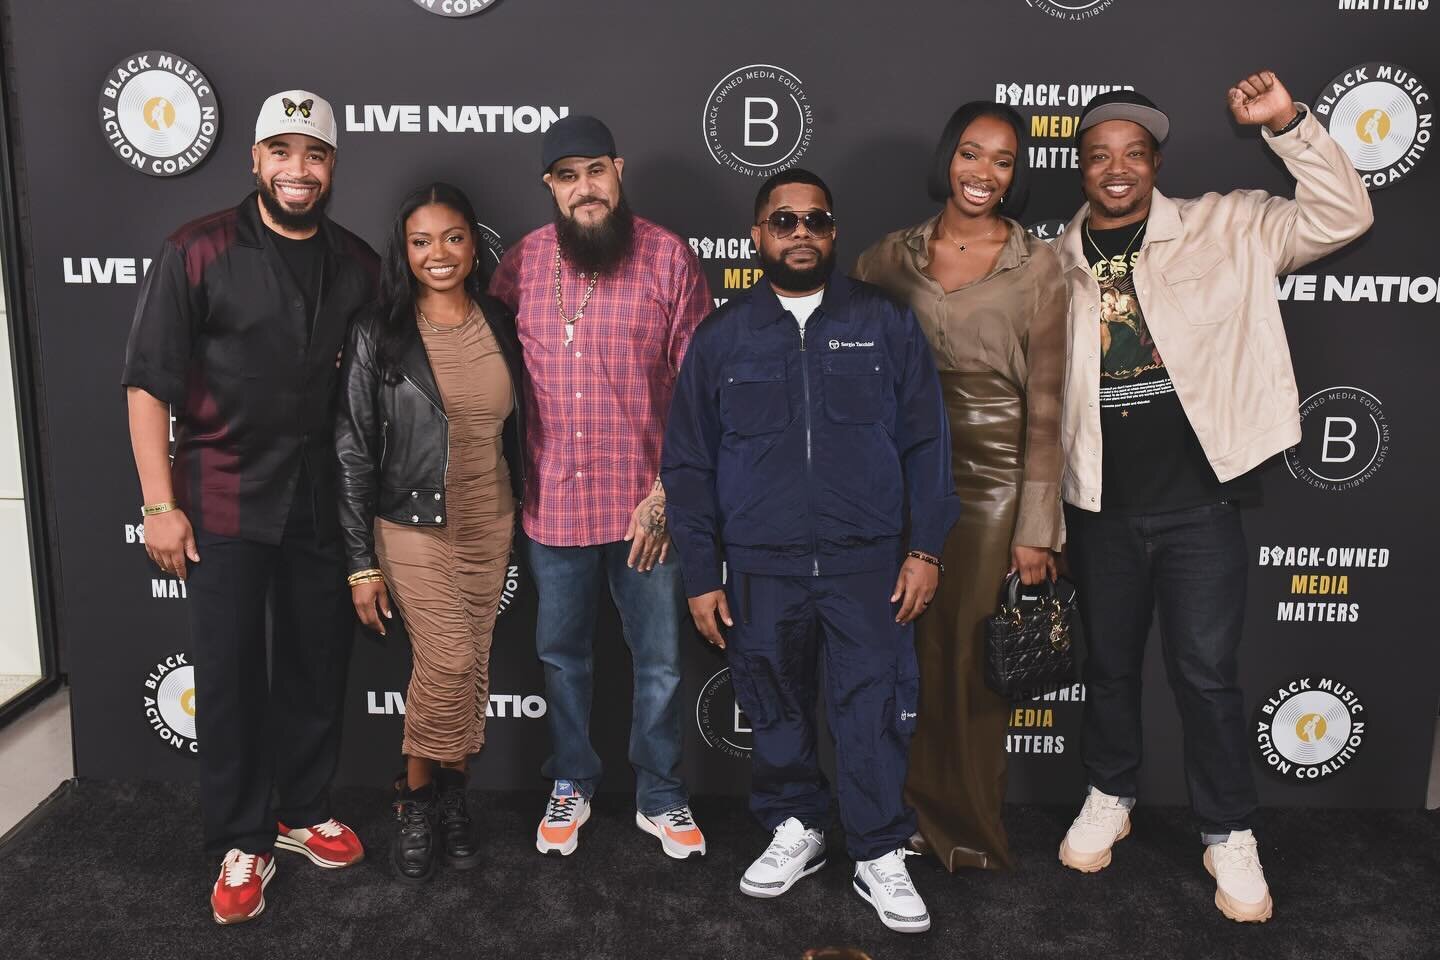 Grammy week is not only about parties but important conversations around entertainment, media and music especially when it involves Black artists, media and talent. 

Clients @neshasagenda co-founder of @supportblackownedmedia and @grouchygreg co-fou